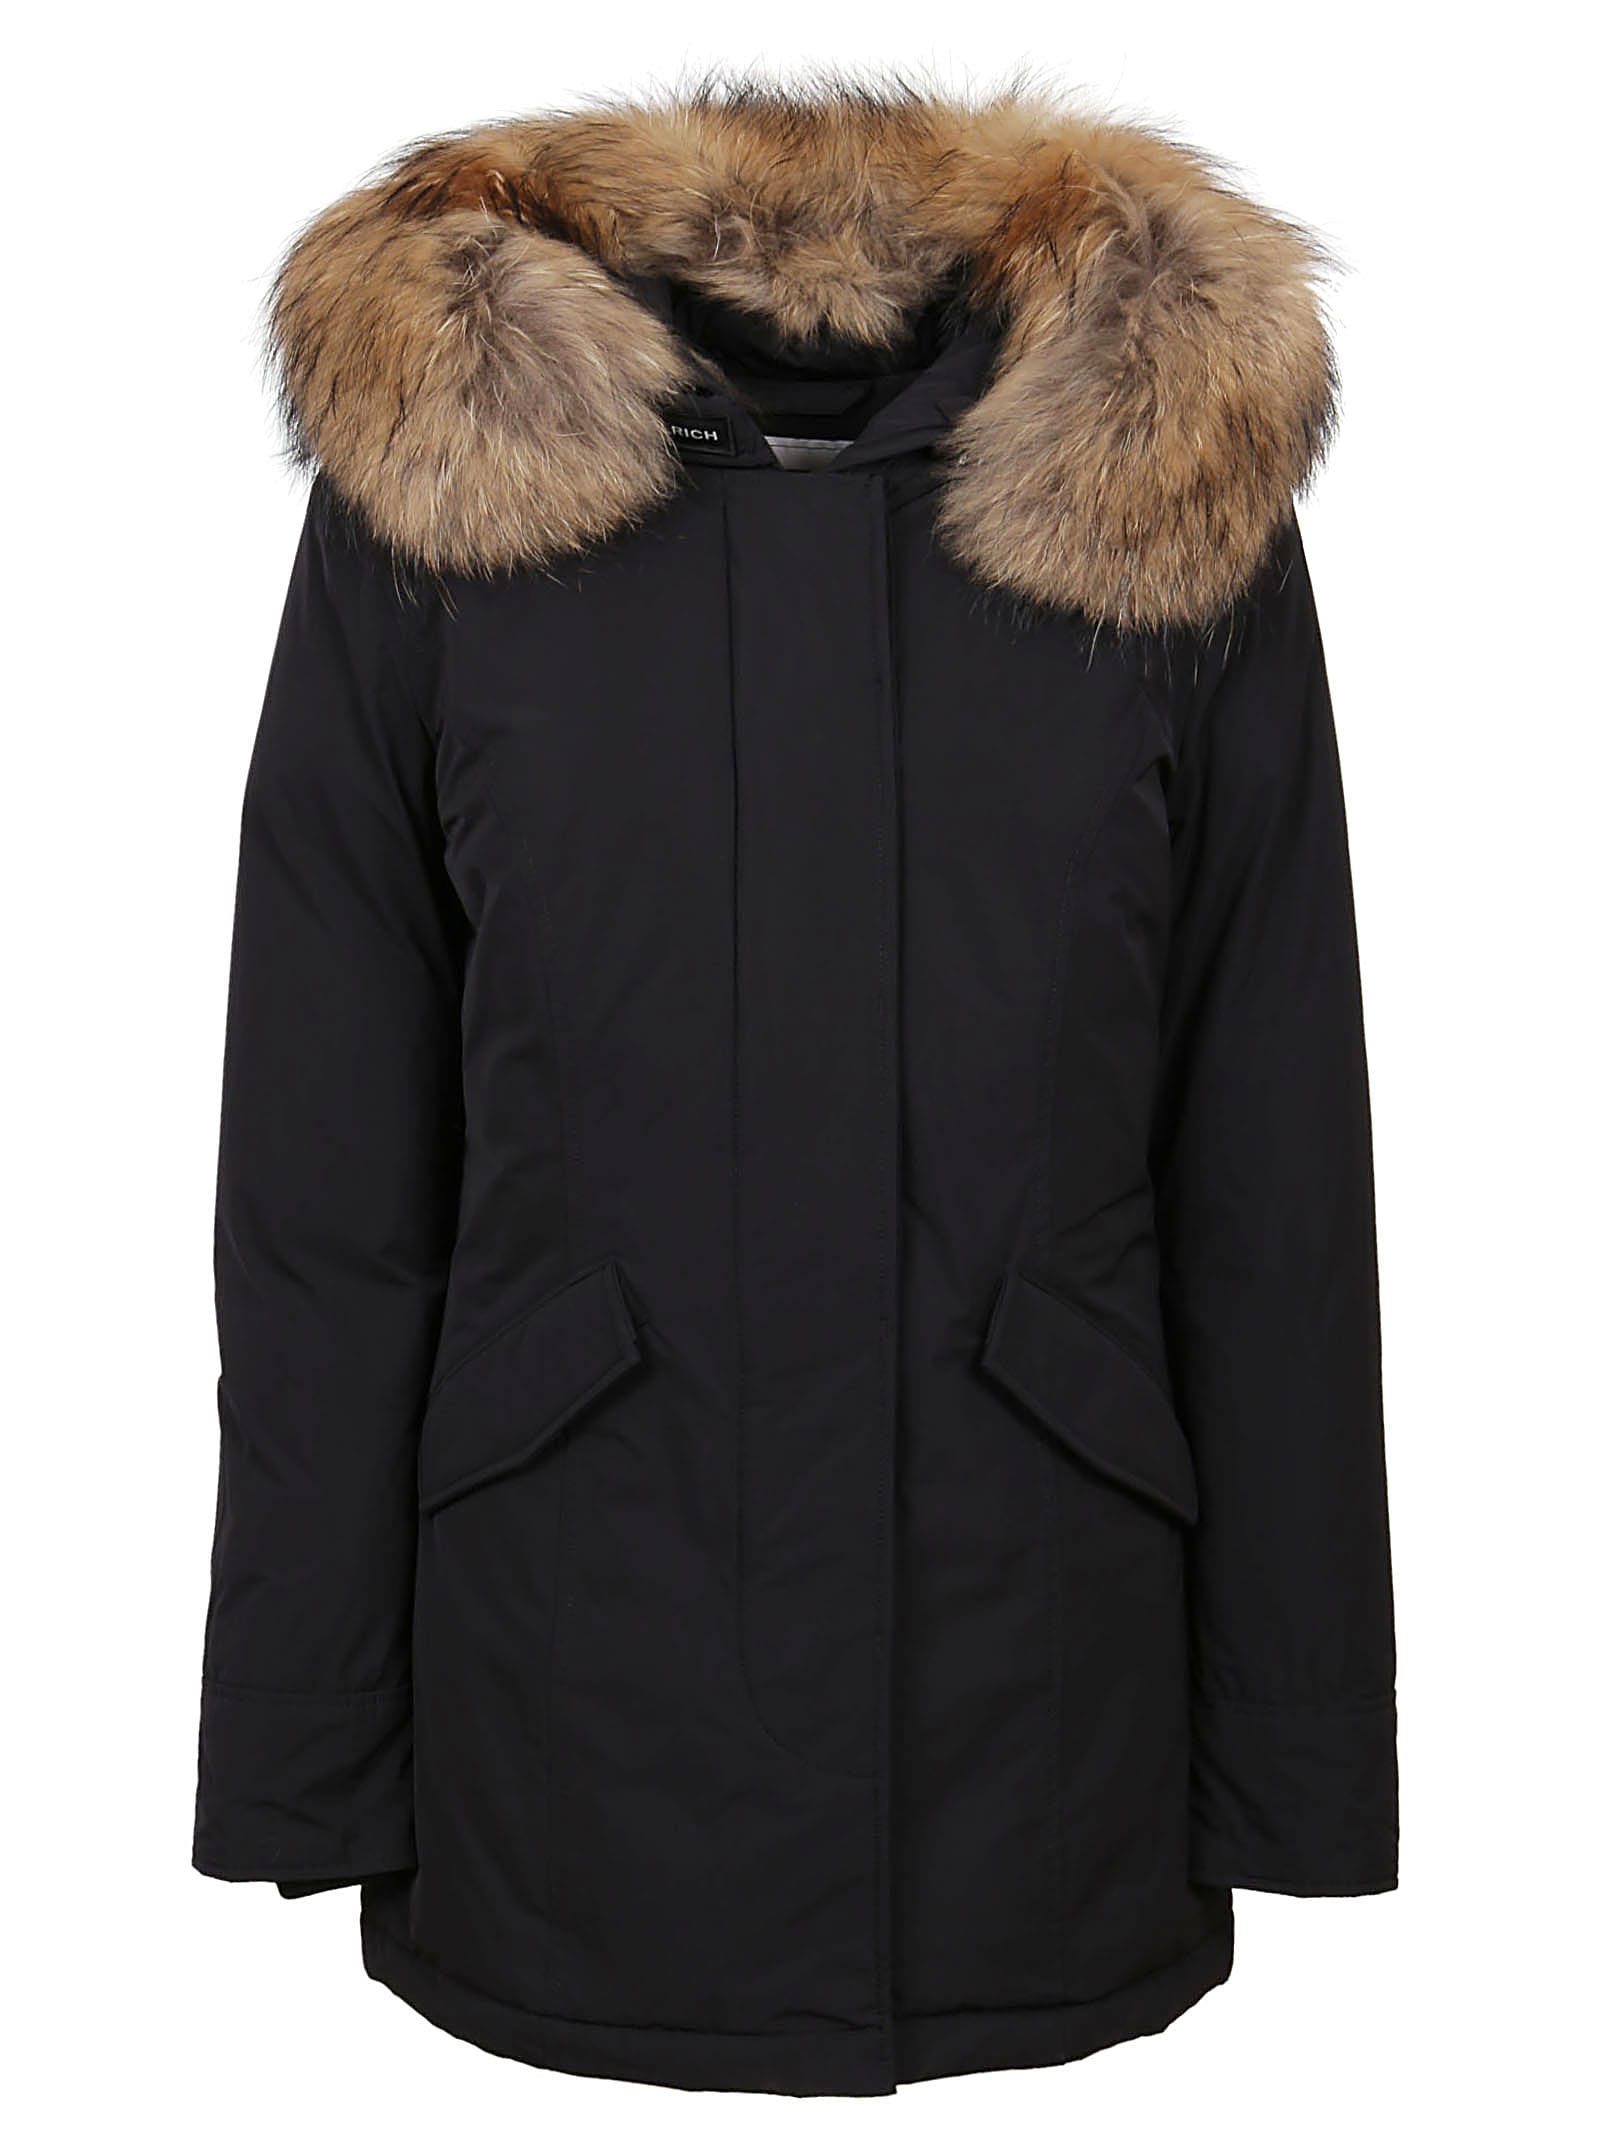 WOOLRICH BLACK DOWN JACKET TECHNICAL FABRIC